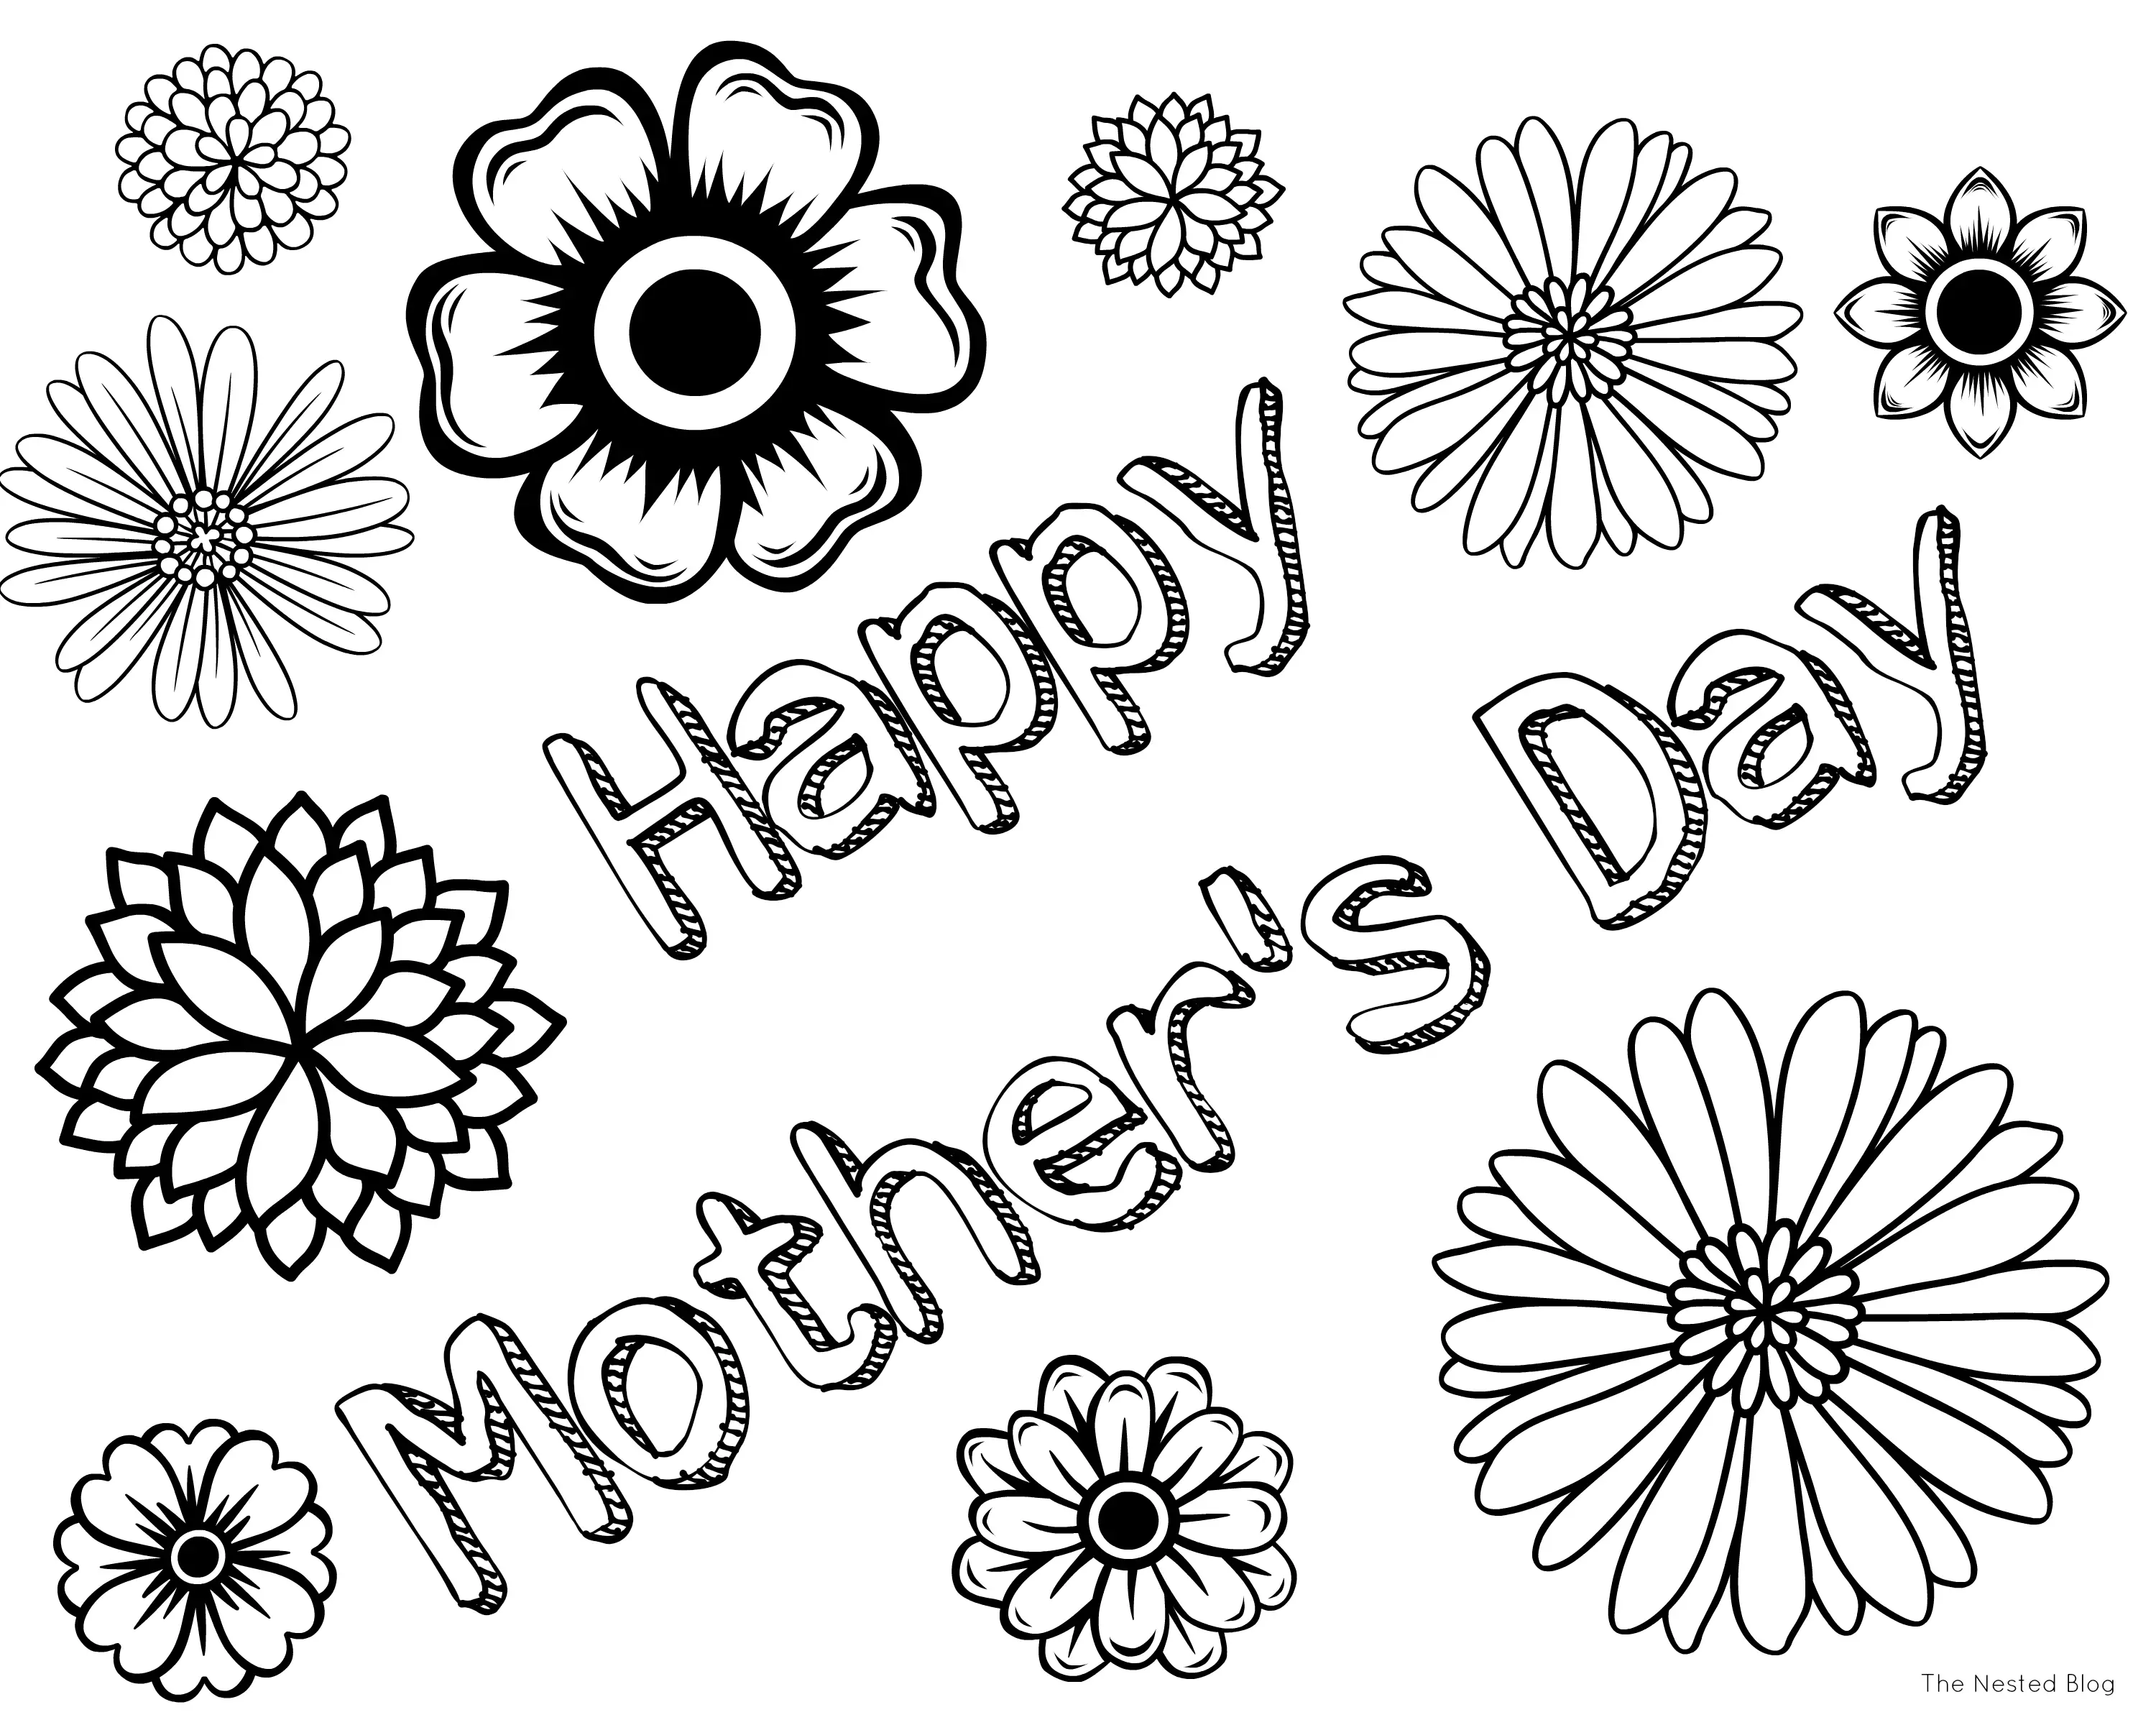 30 Free and Printable Mother's Day Coloring Cards